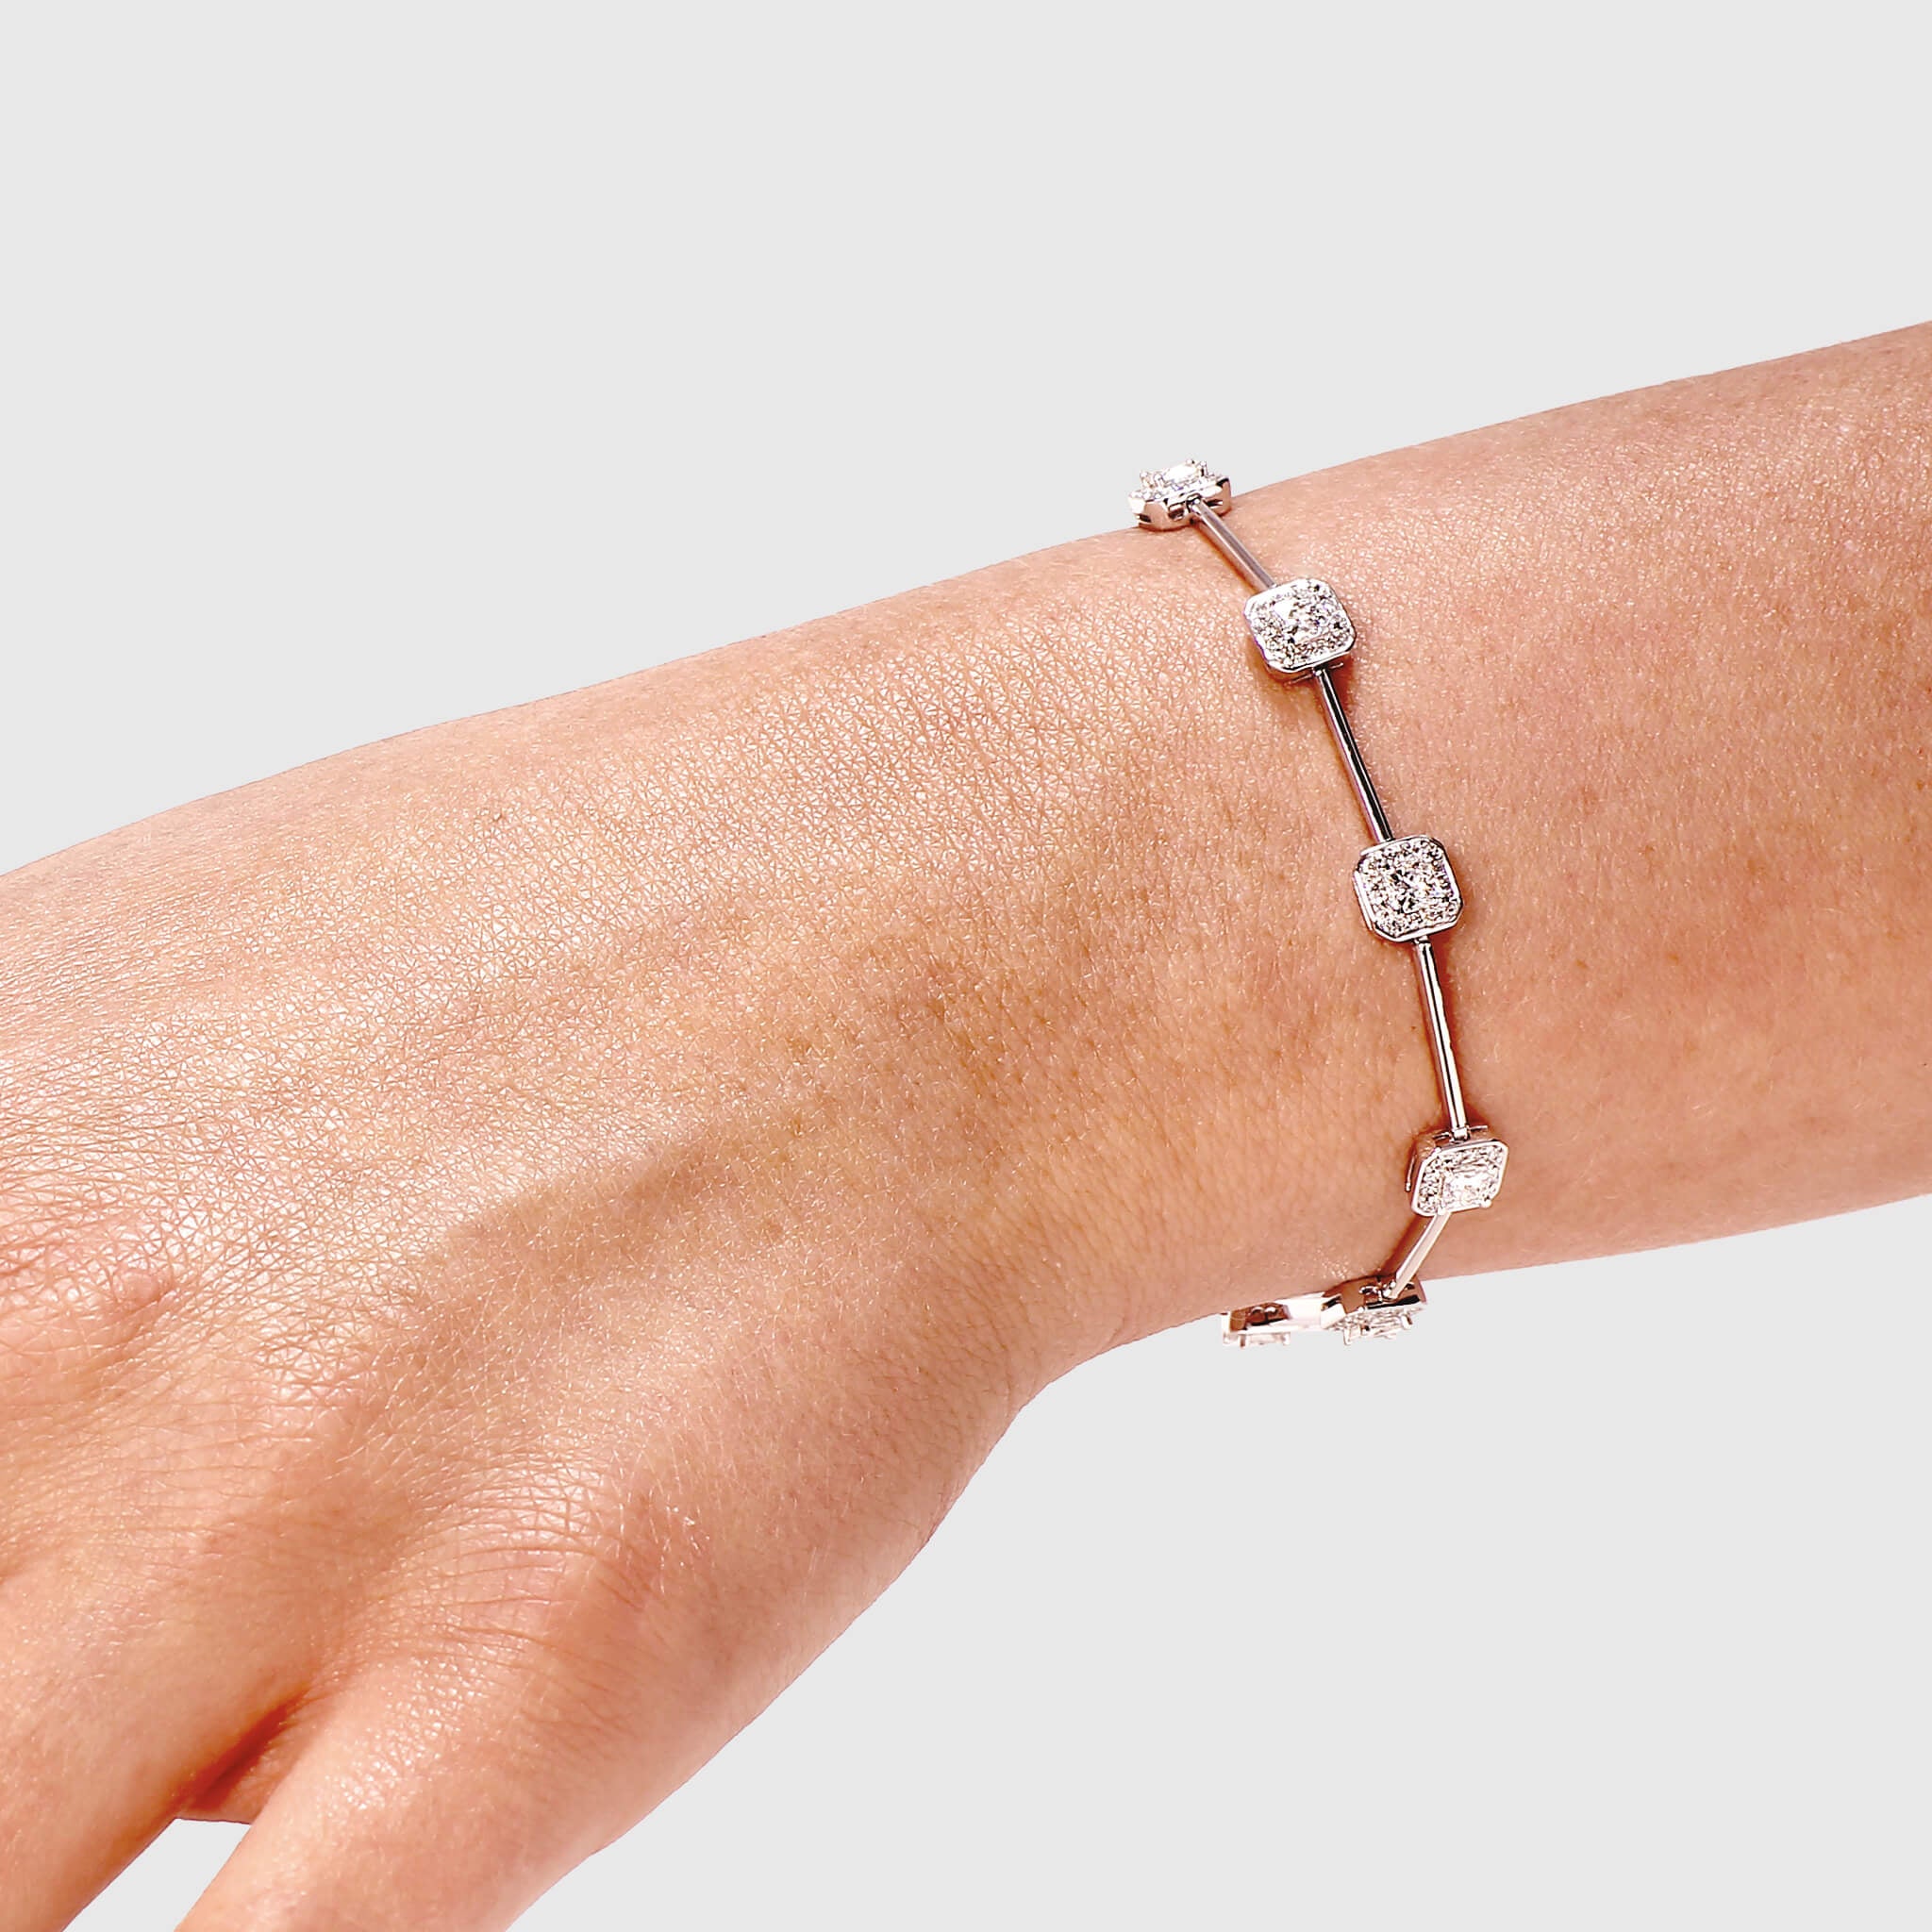 Shimansky - Women Wearing the My Girl Halo Station Bracelet 3.97ct Crafted in 18K White Gold